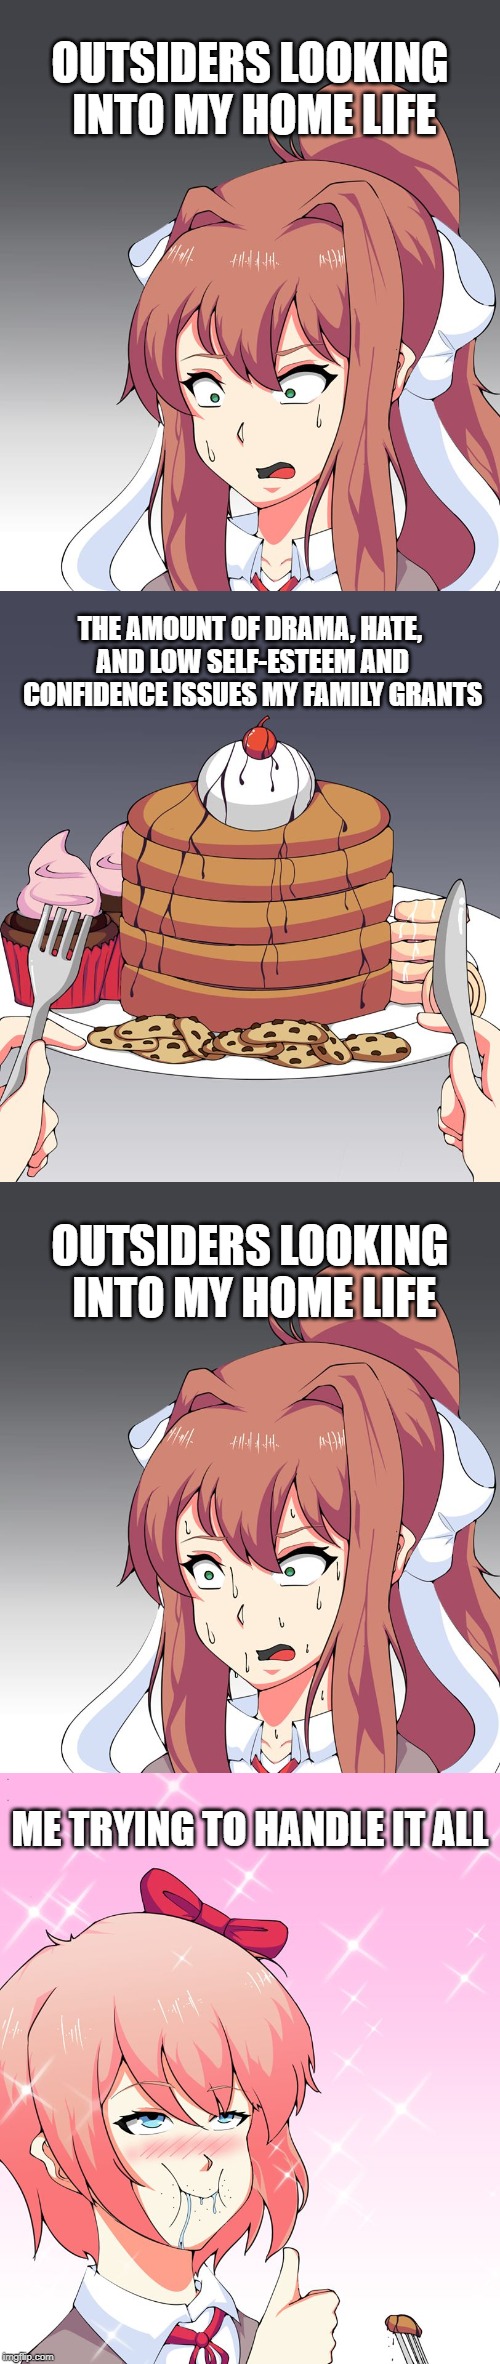 Trying to Handle it All | OUTSIDERS LOOKING INTO MY HOME LIFE; THE AMOUNT OF DRAMA, HATE, AND LOW SELF-ESTEEM AND CONFIDENCE ISSUES MY FAMILY GRANTS; OUTSIDERS LOOKING INTO MY HOME LIFE; ME TRYING TO HANDLE IT ALL | image tagged in memes,doki doki literature club,relatable problems | made w/ Imgflip meme maker